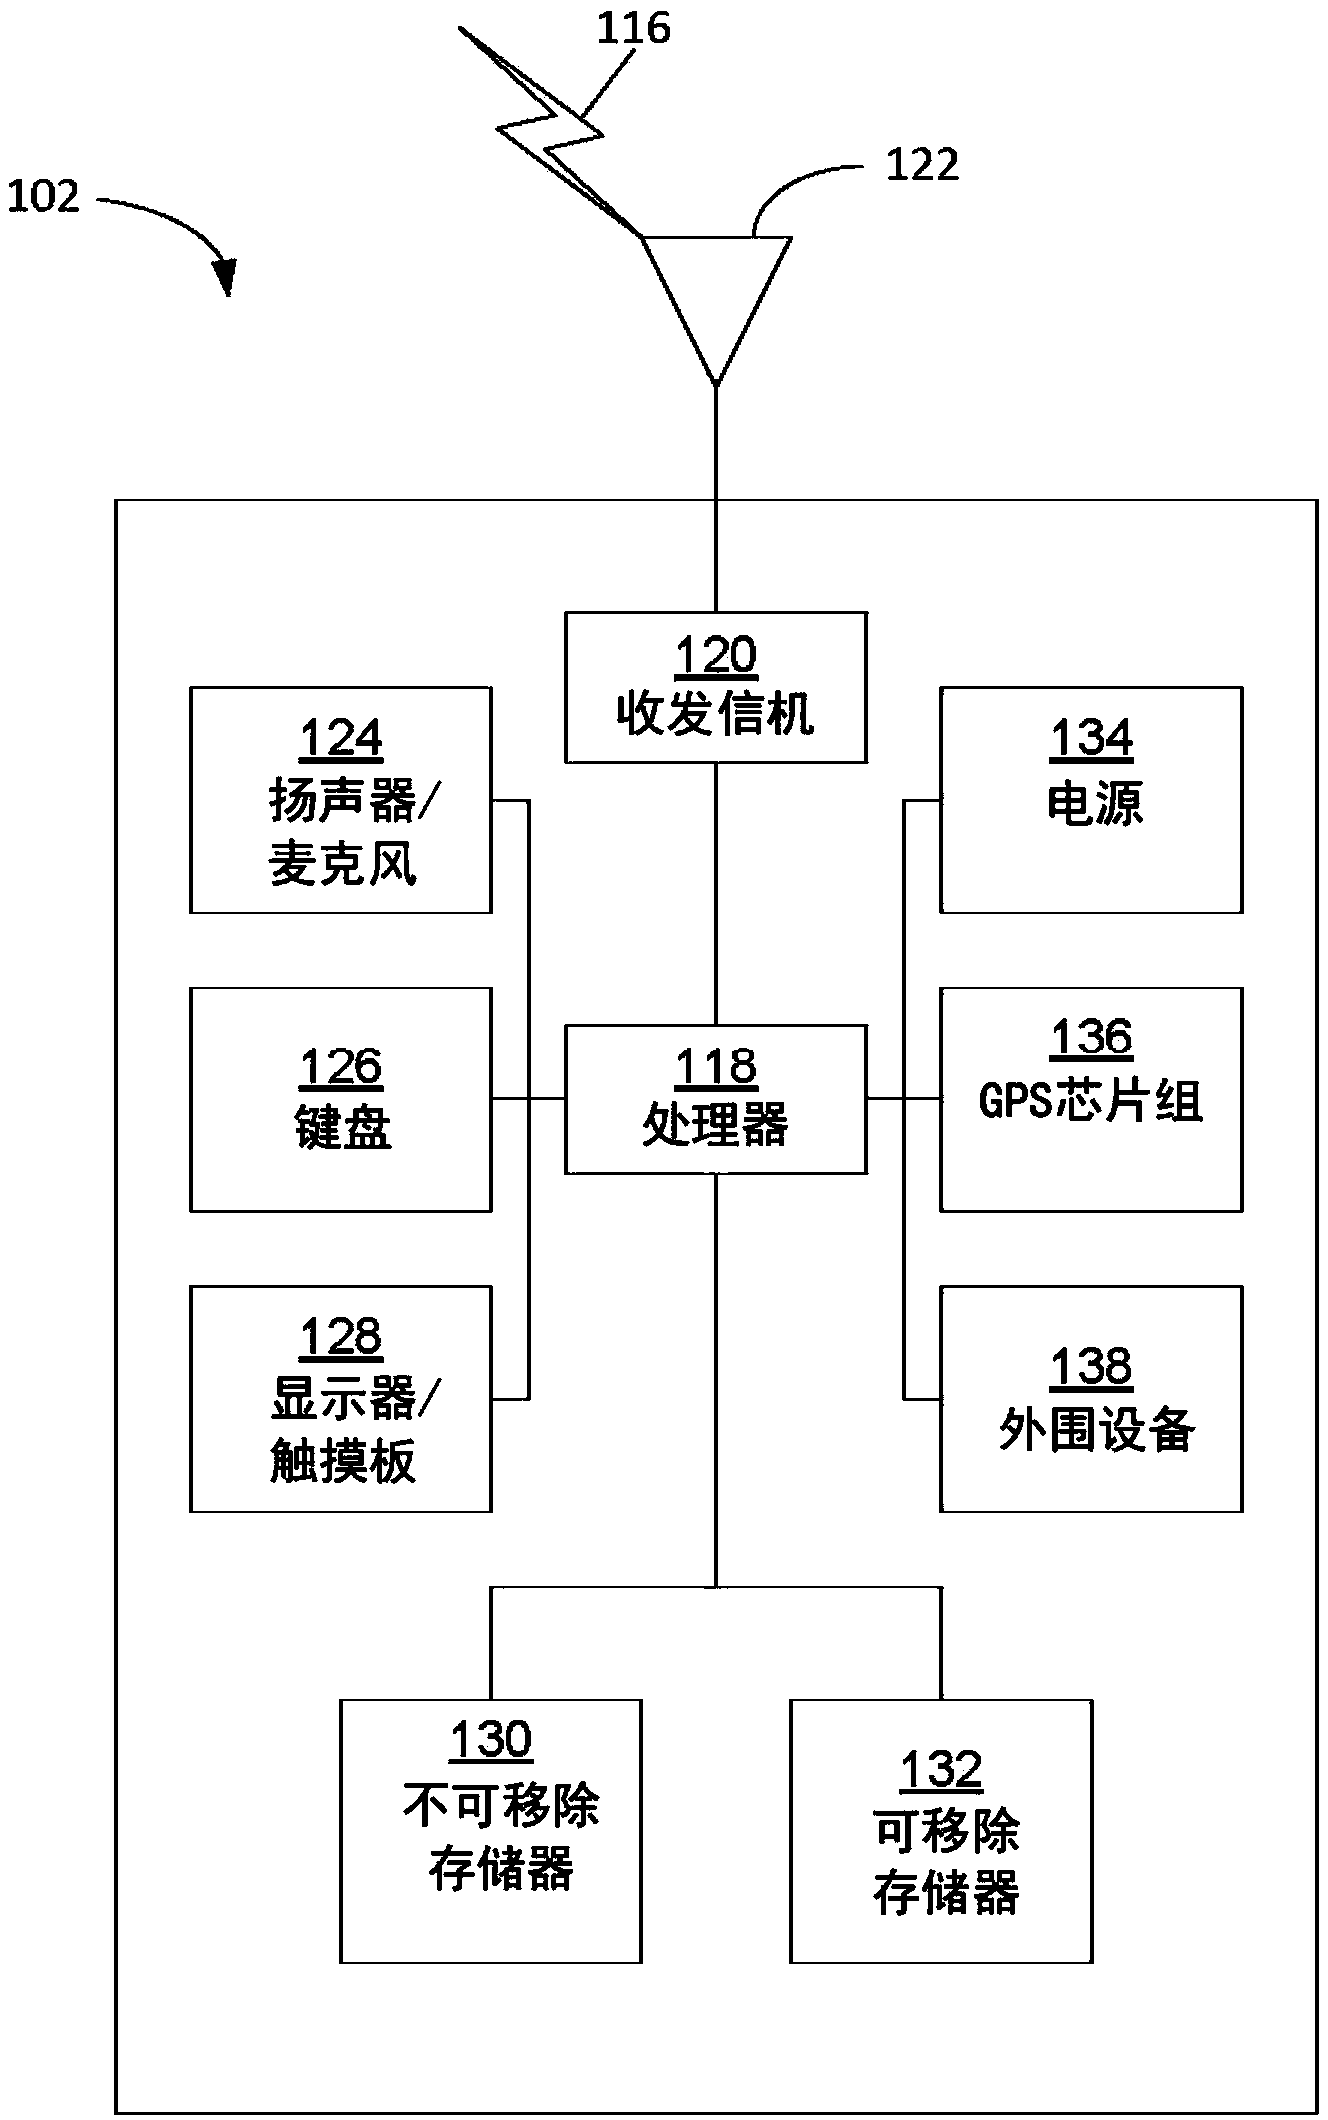 Systems and methods for improved uplink coverage